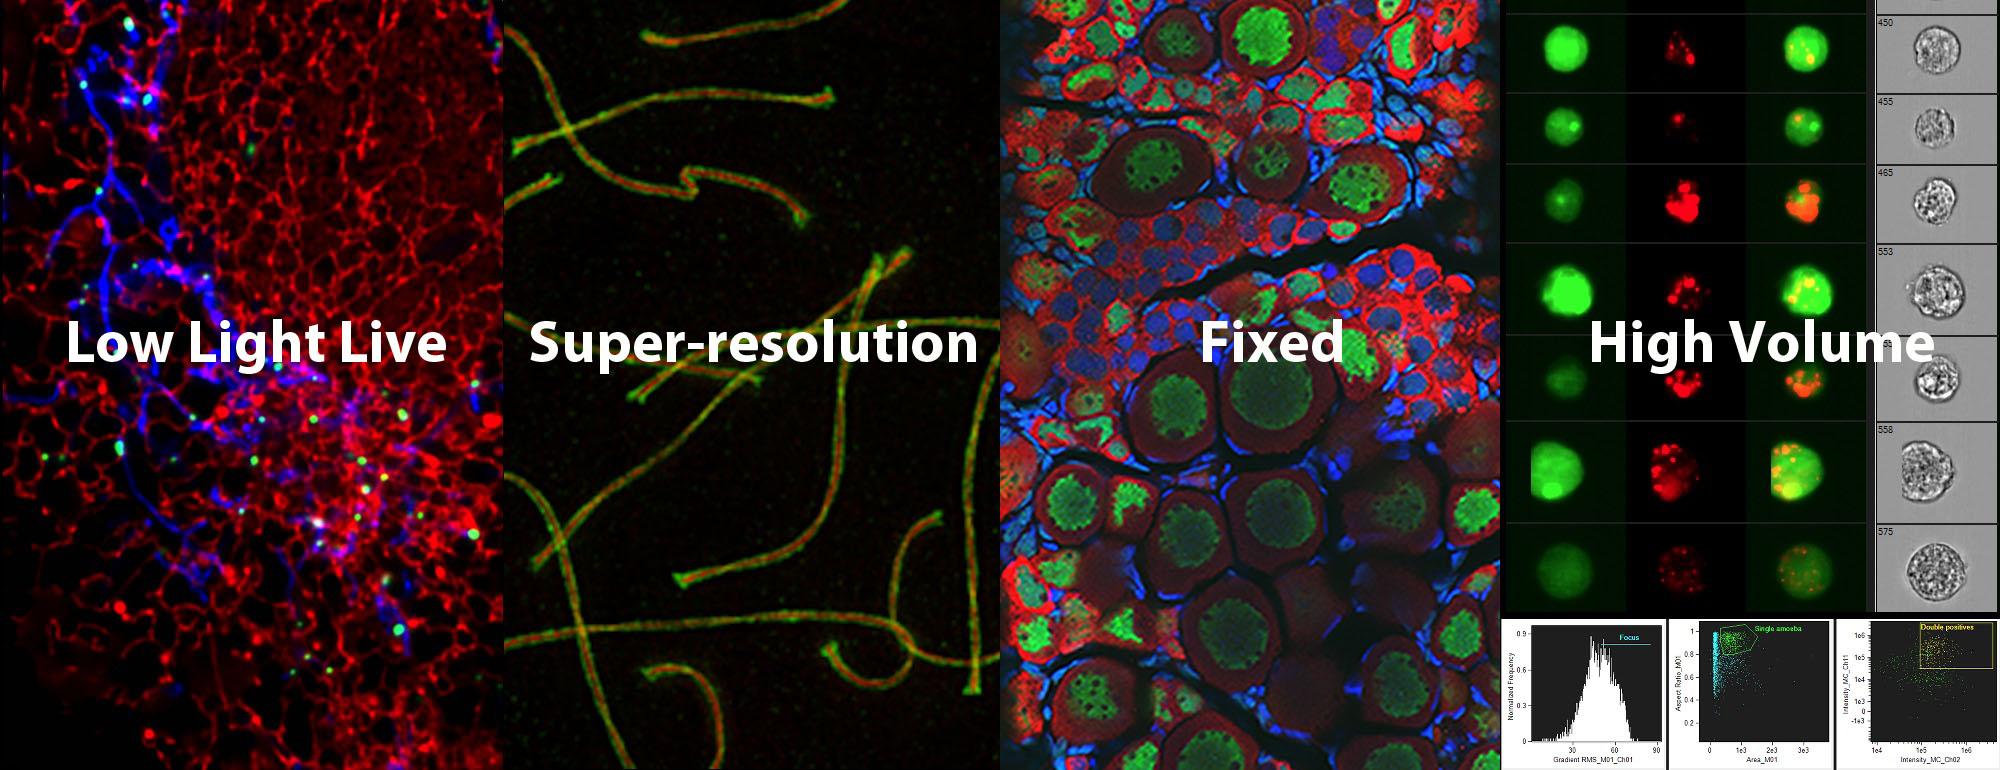 microscopy images with text